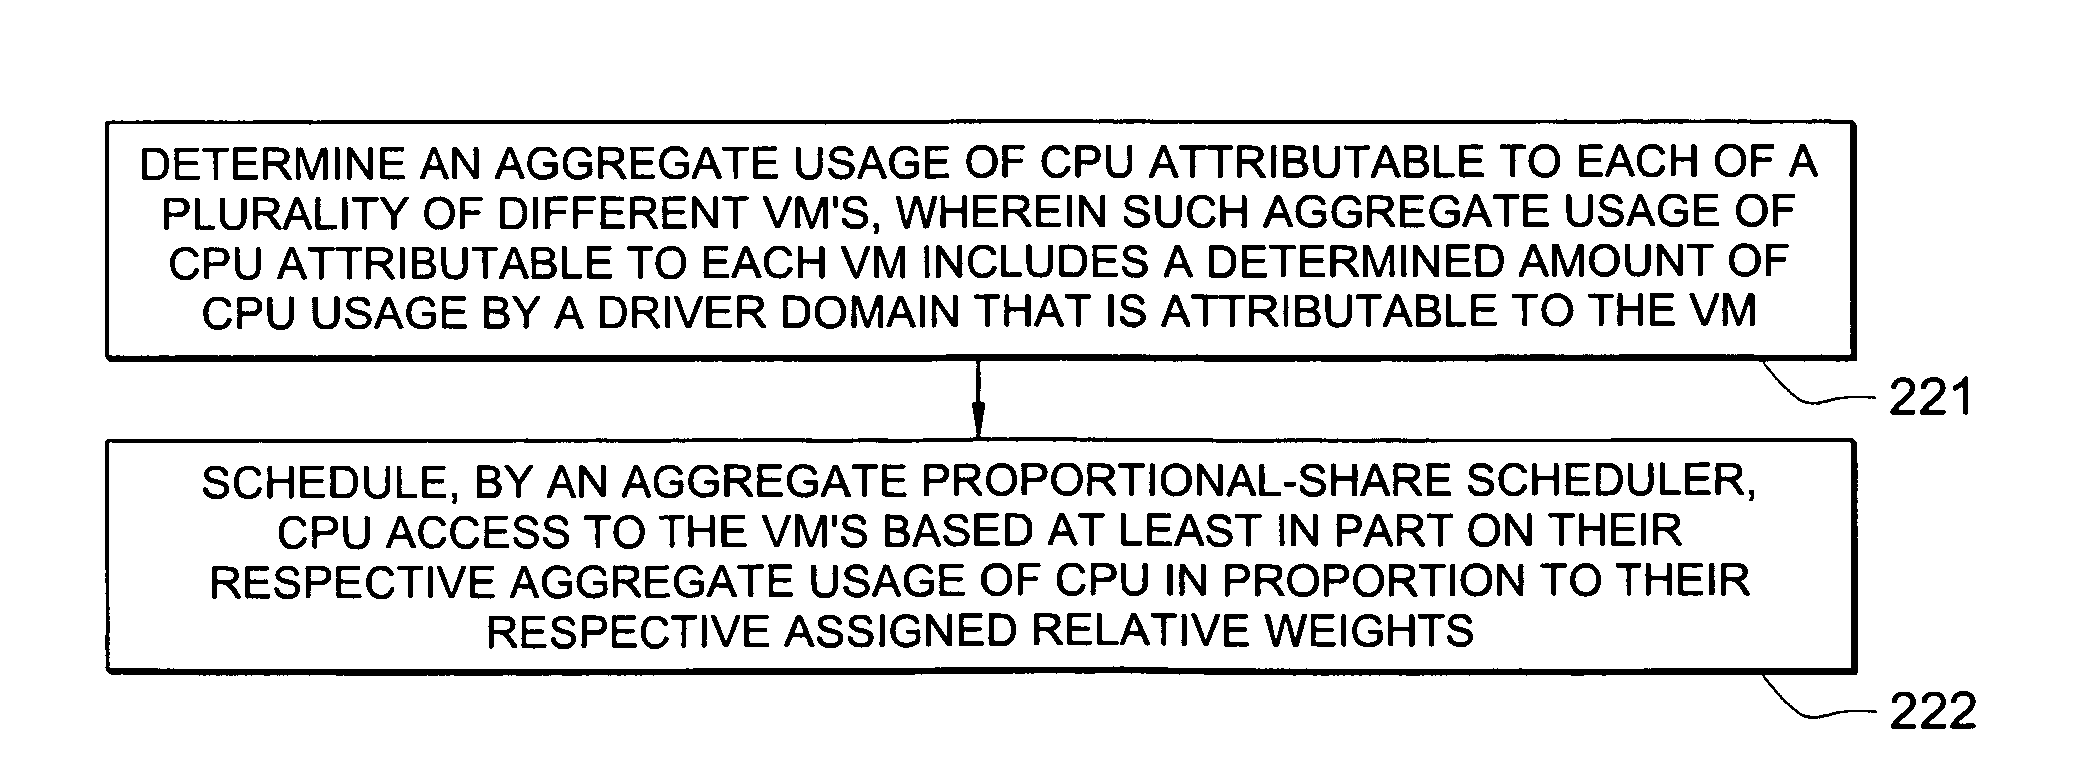 System and method for controlling aggregate CPU usage by virtual machines and driver domains